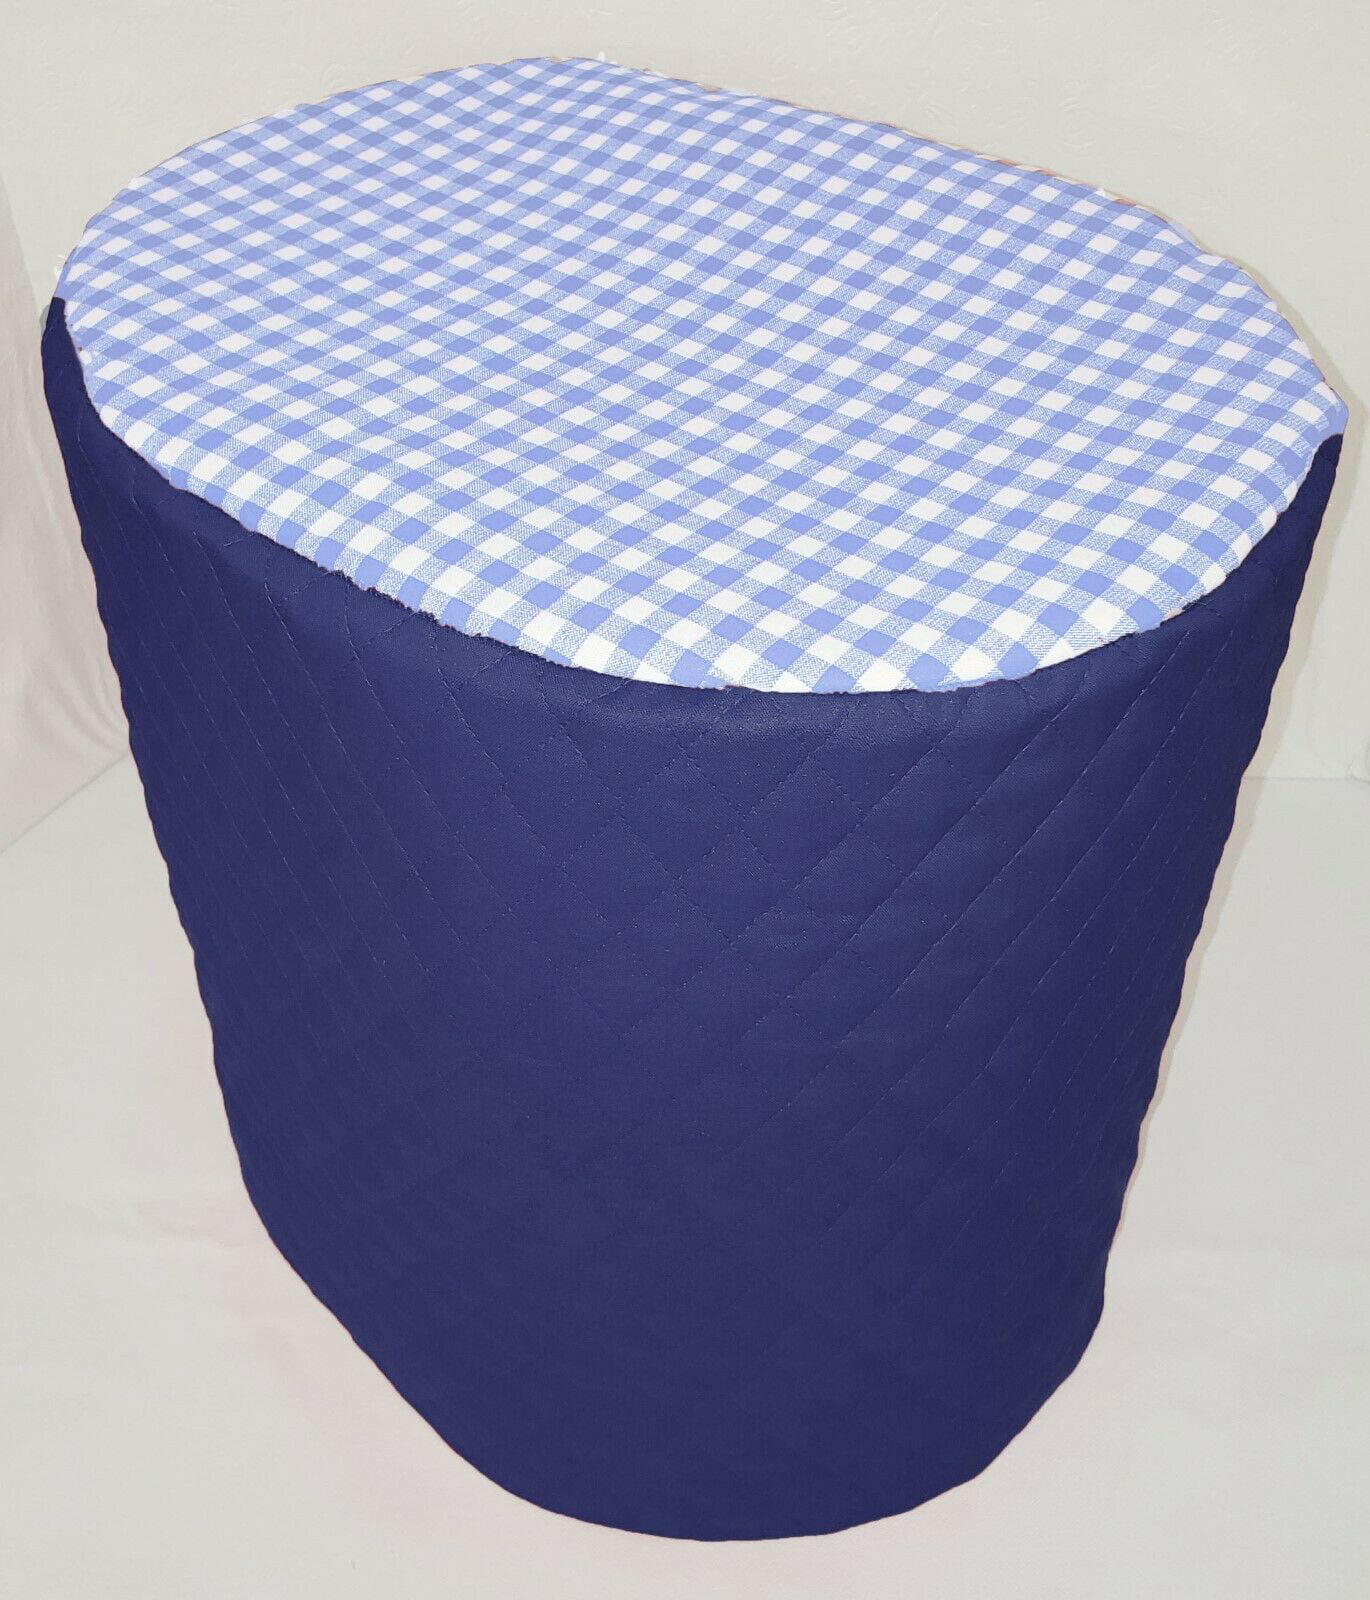 Light Blue & White Checked Cover Compatible with Keurig Coffee Brewing Systems 